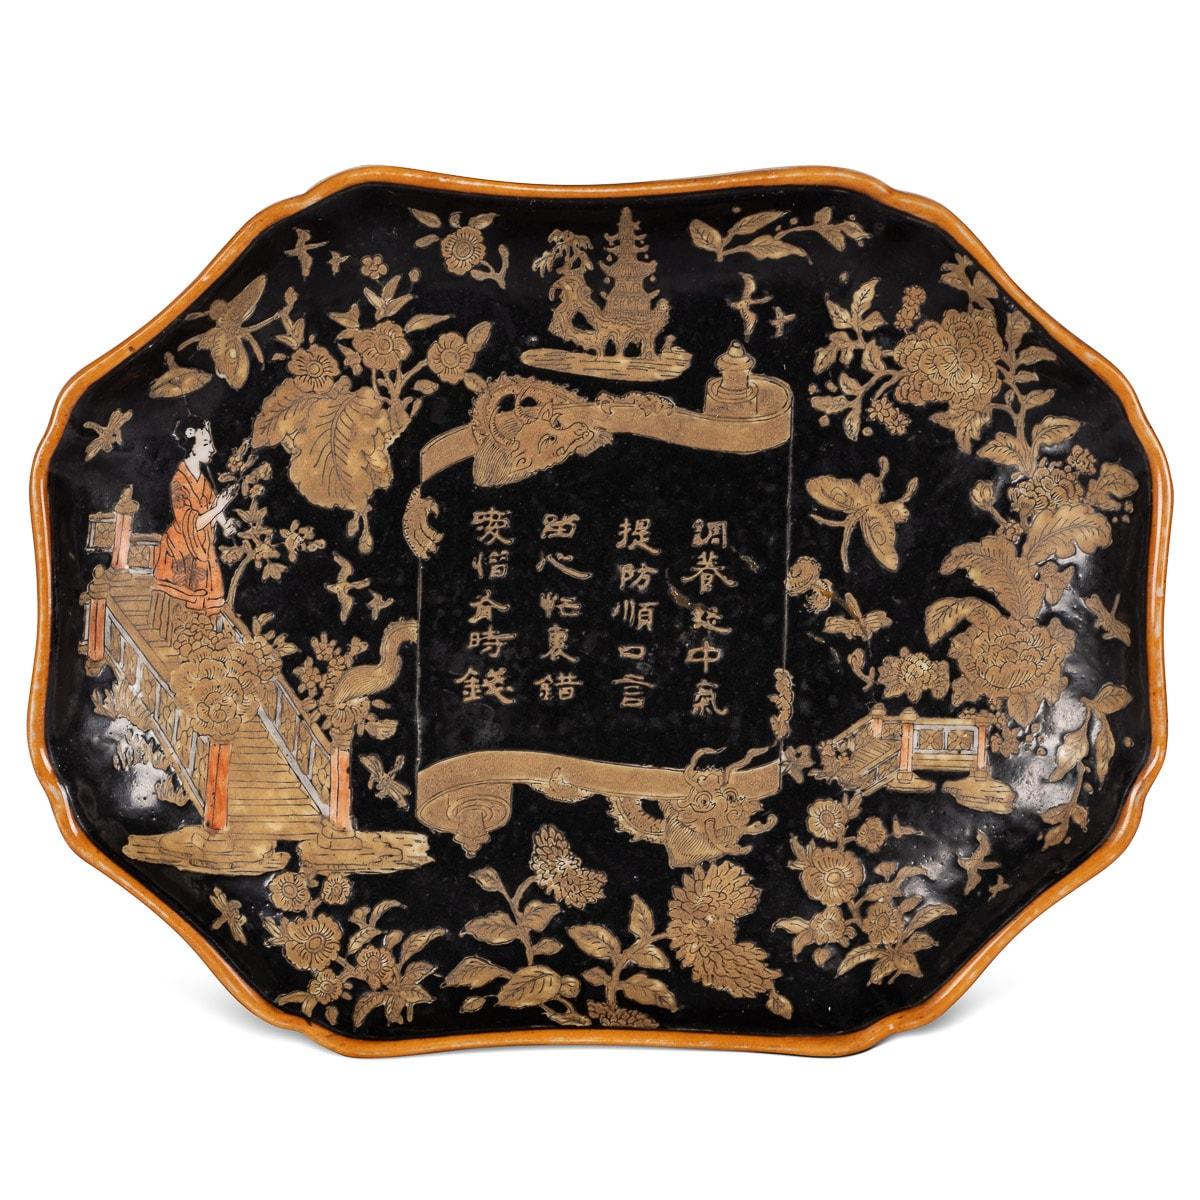 Antique 19th century Chinese pair of porcelain dishes hand painted in black polychrome enamel with traditional scenes, scrolls with emerging dragons, a pagoda along with a floral foliage surroundings. The center of the dish has an inscription in